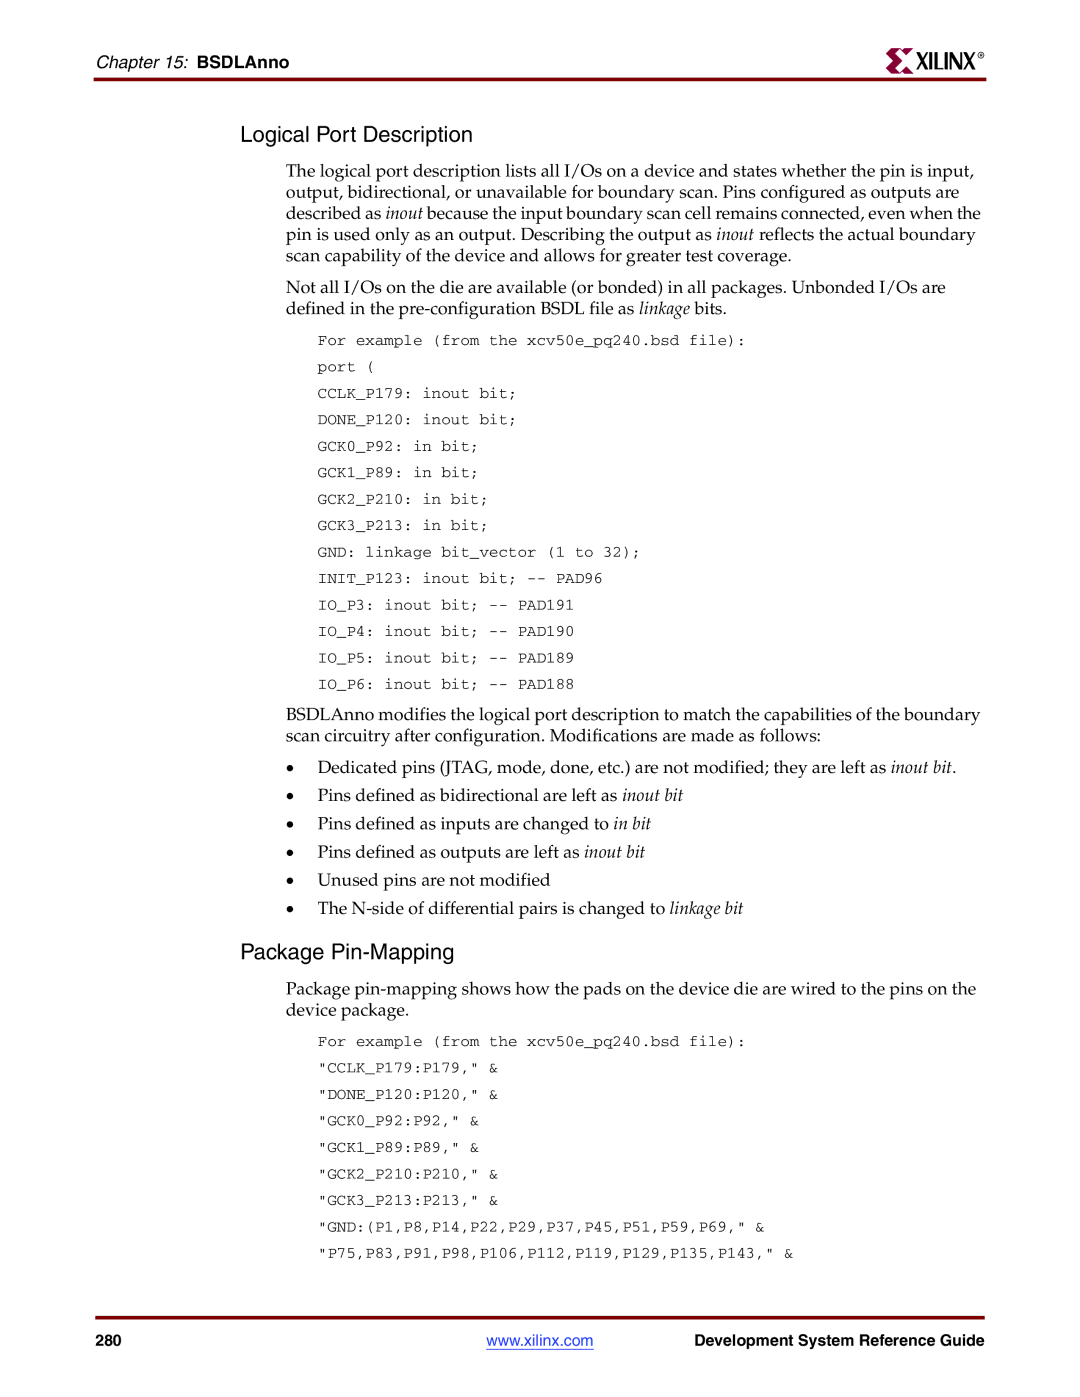 Xilinx 8.2i manual Logical Port Description, Package Pin-Mapping 